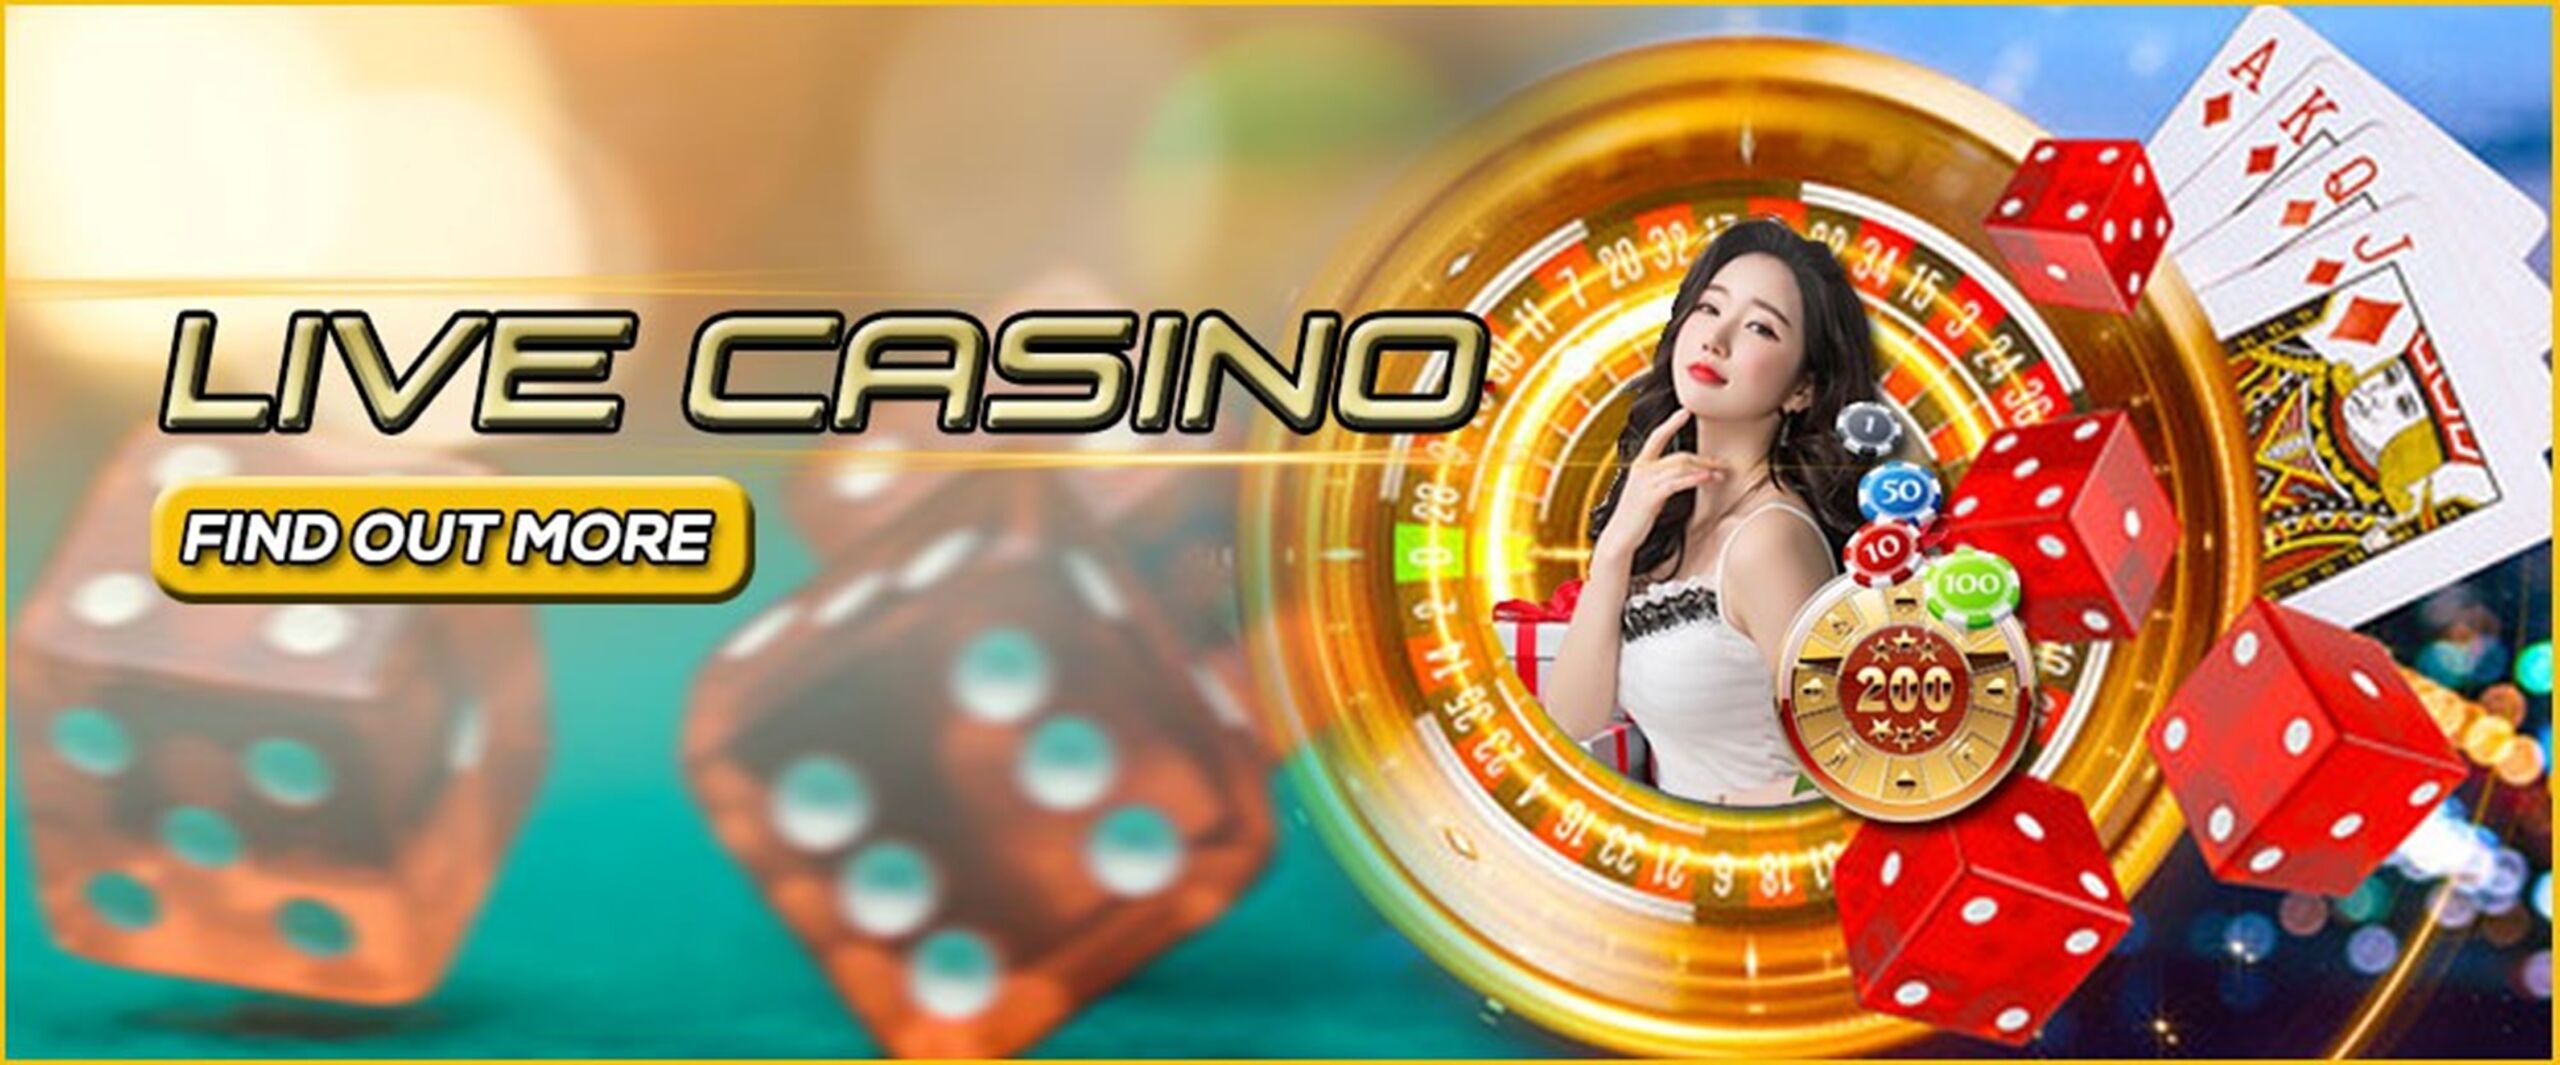 Tips and tricks for winning at online casino games in Singapore